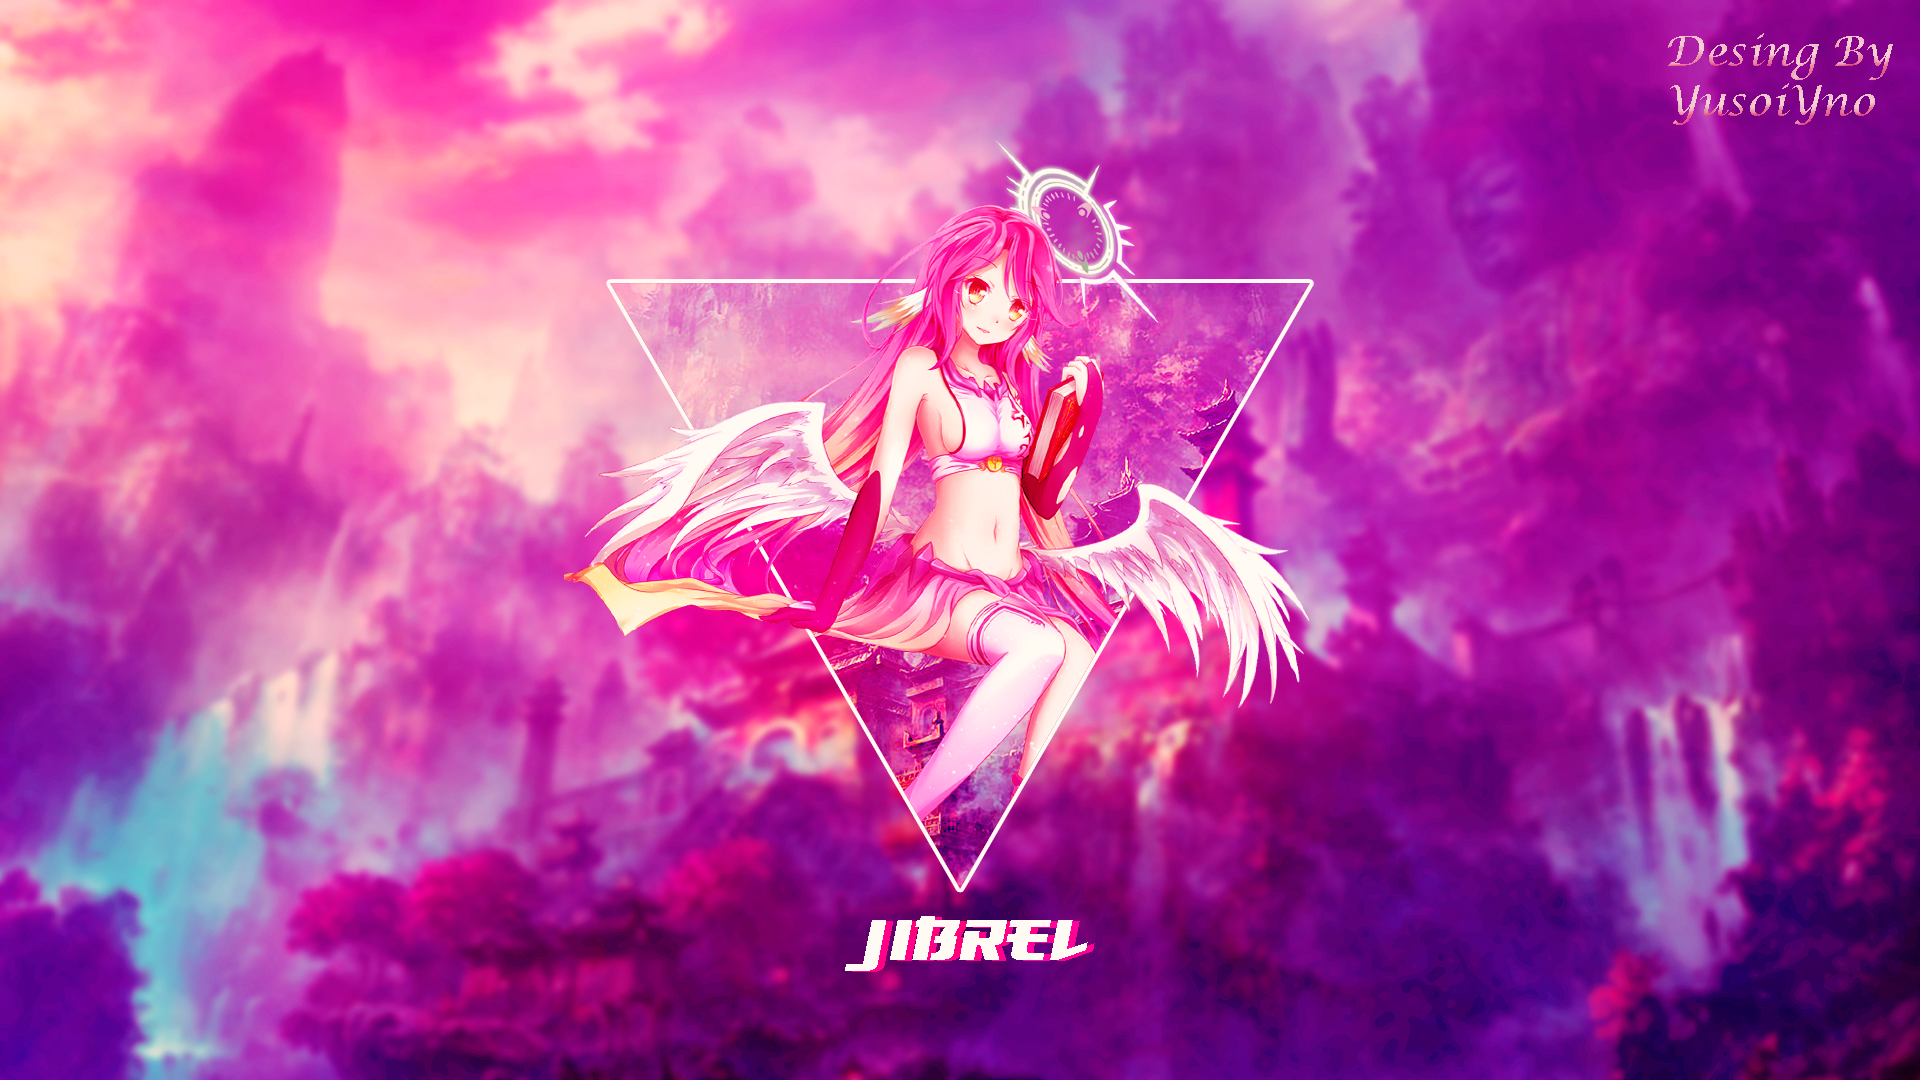 Anime 1920x1080 anime girls No Game No Life pink hair picture-in-picture Jibril